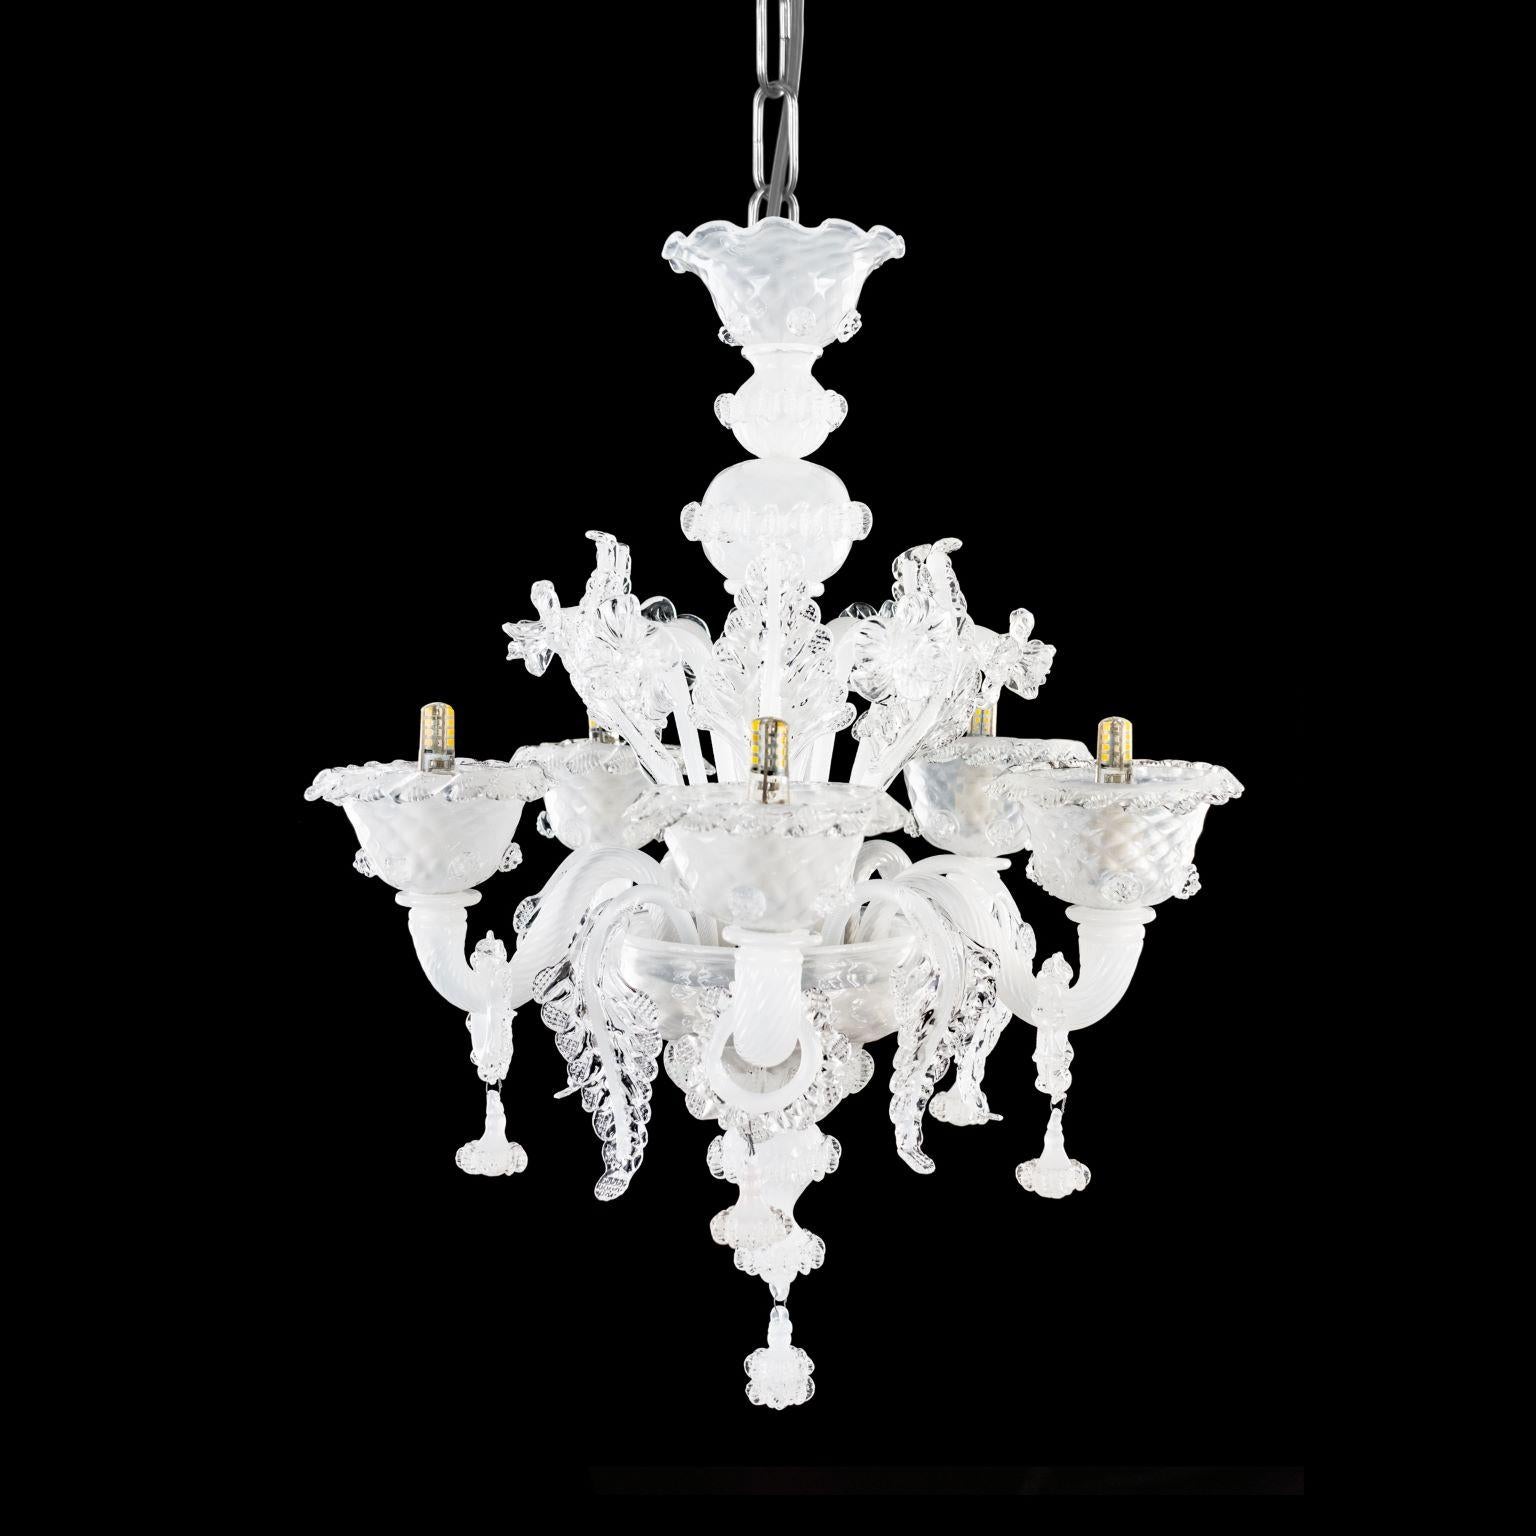 Italian Artistic Rich Chandelier 5 Arms white-clear Murano Glass by Multiforme in stock For Sale